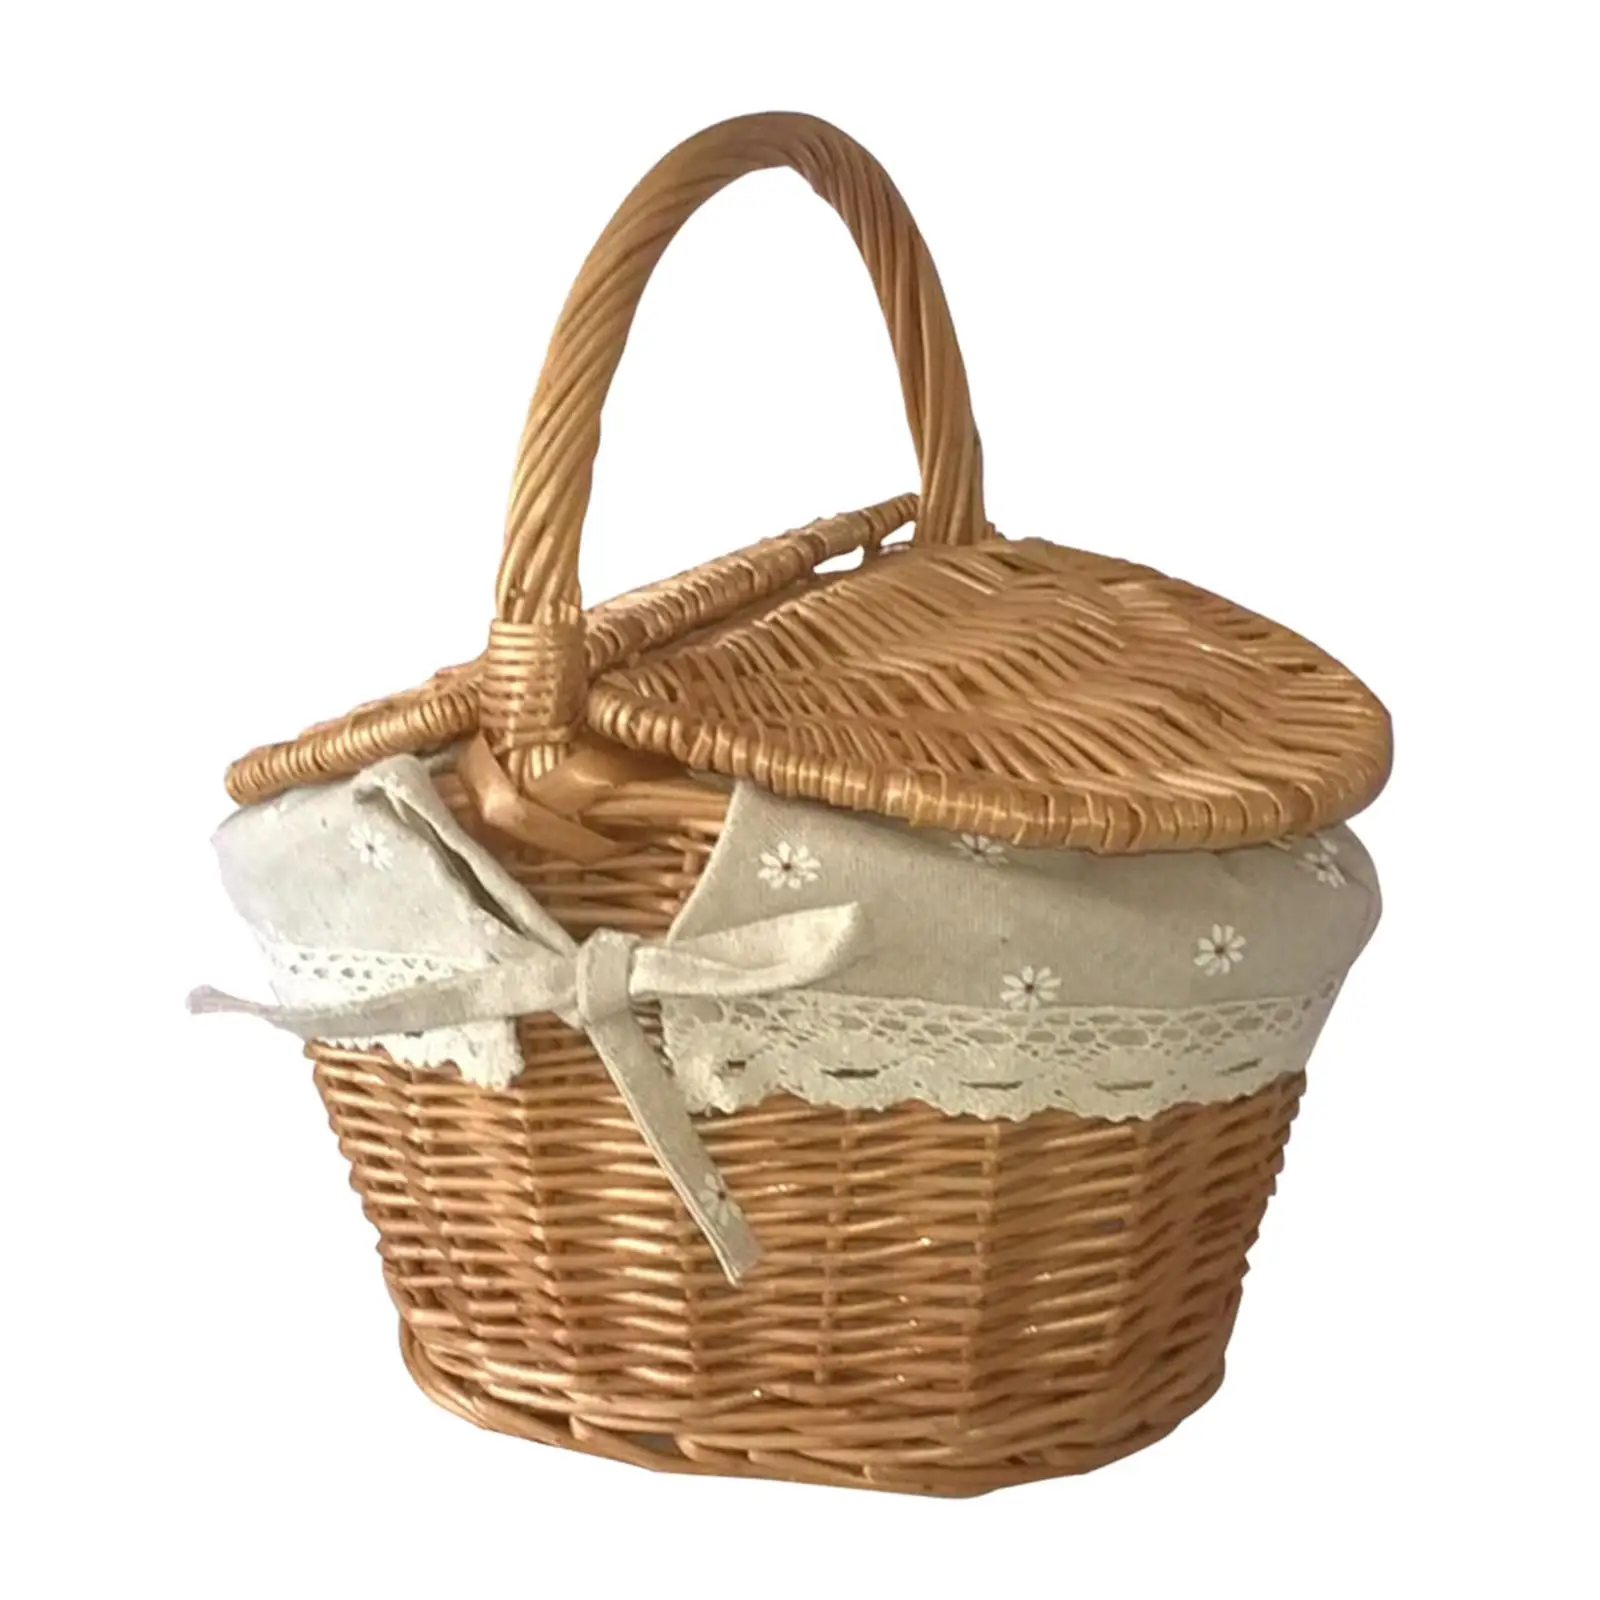 Handwoven Wicker Picnic Basket Wicker Woven Basket with Lid and Handle for Camping